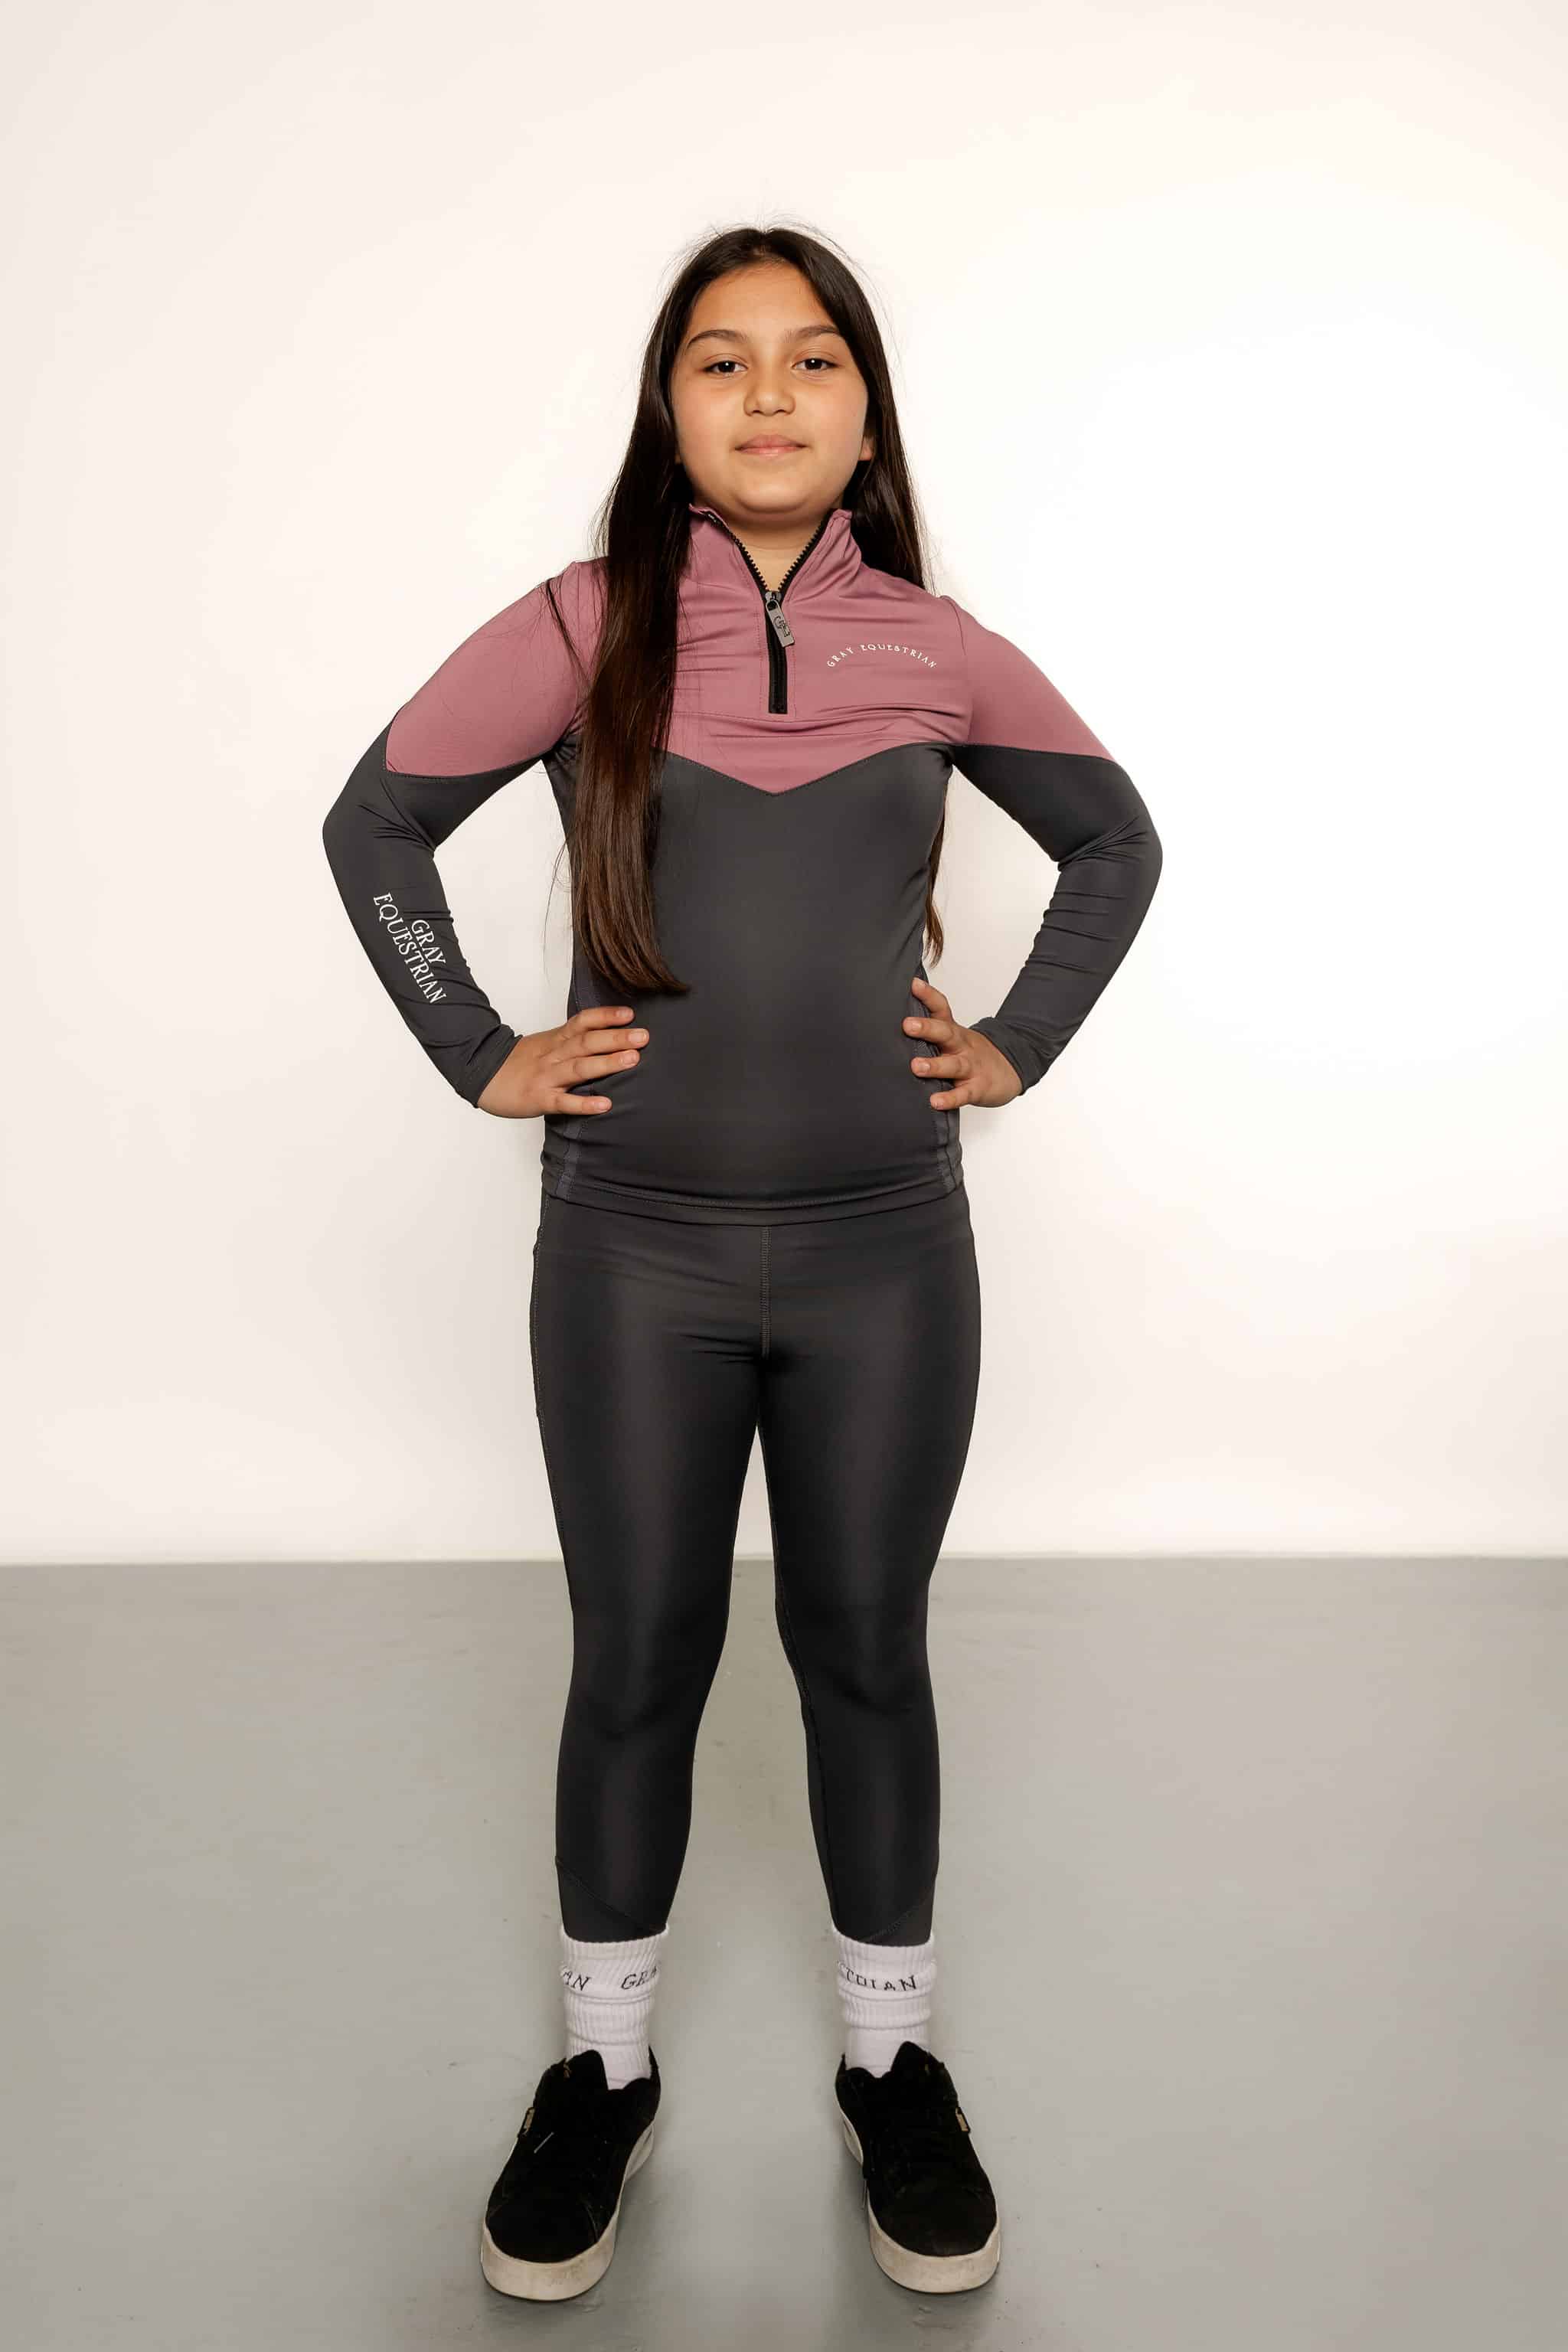 Young rider wearing grey and pink base layer and grey leggings